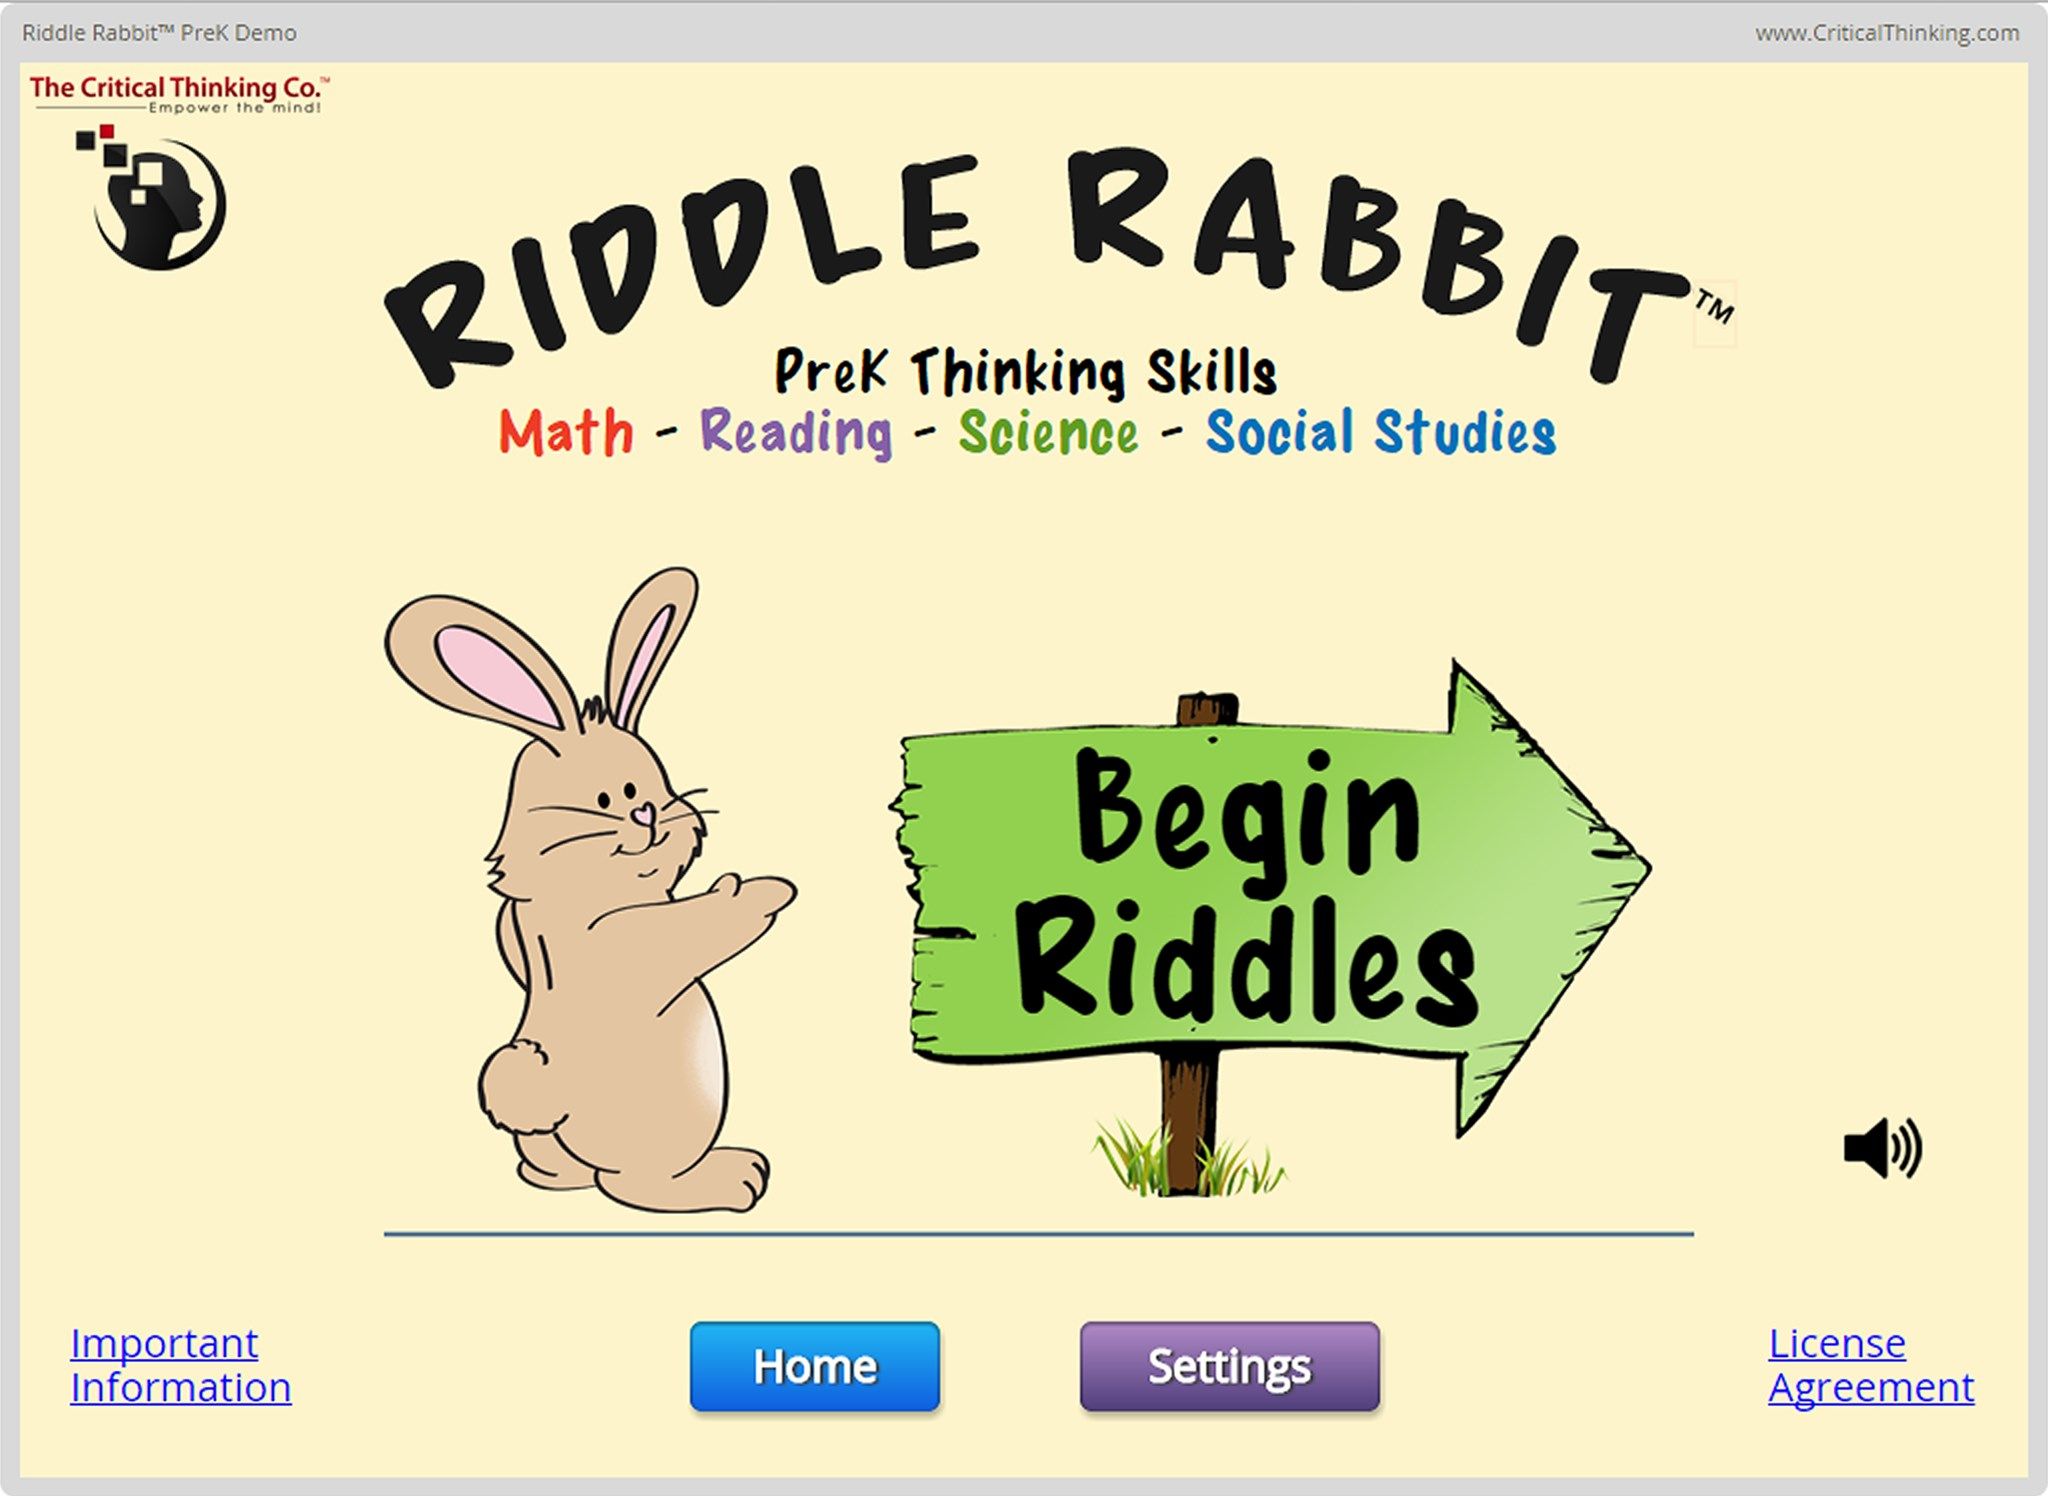 Welcome to Riddle Rabbit, let's begin!